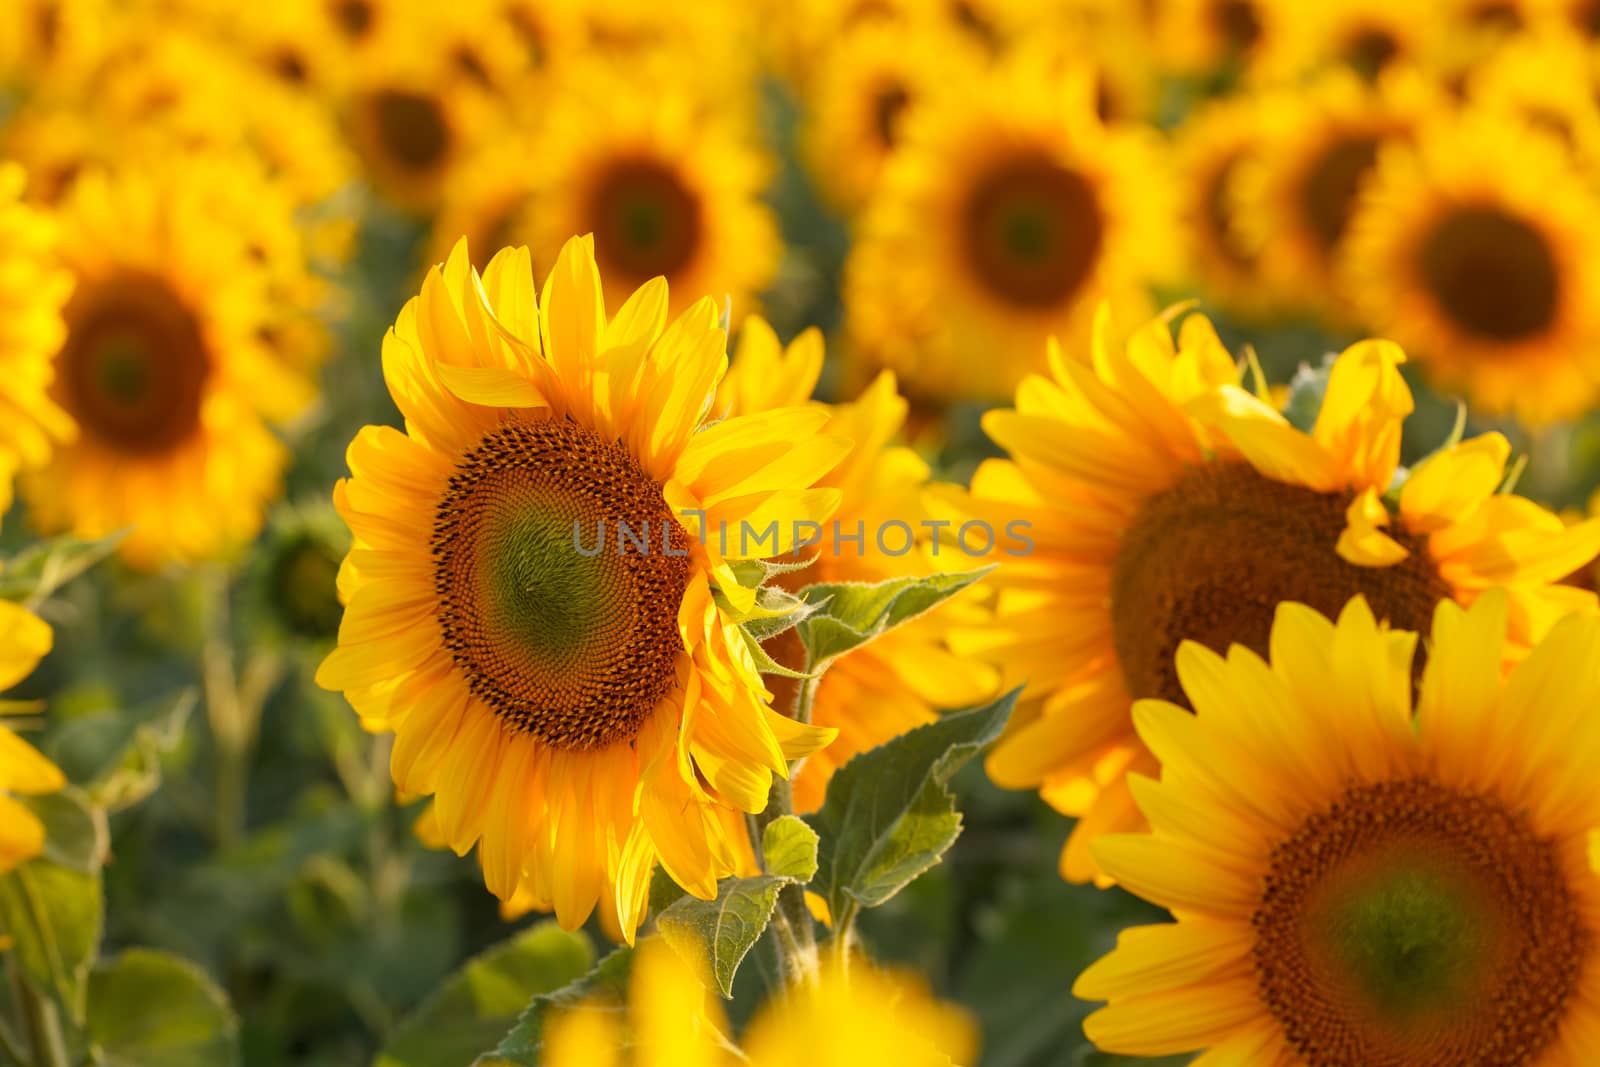 Field of sunflowers backlit. Focus in the foreground